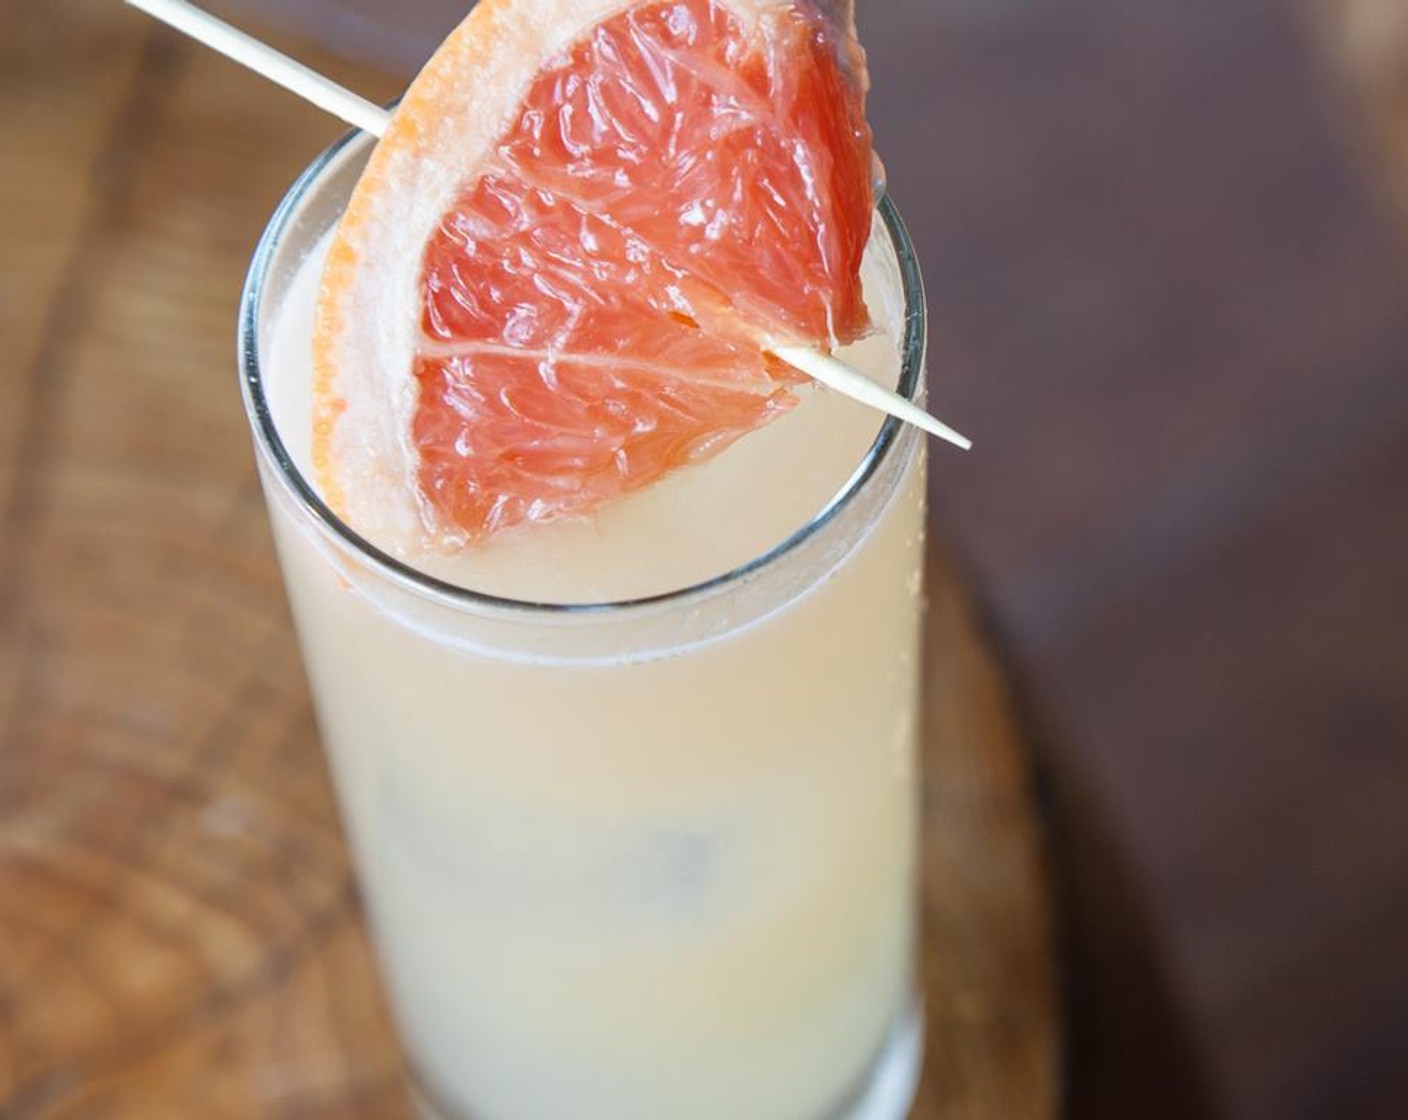 step 3 Garnish with a quarter of a Grapefruit (to taste). Serve immediately.